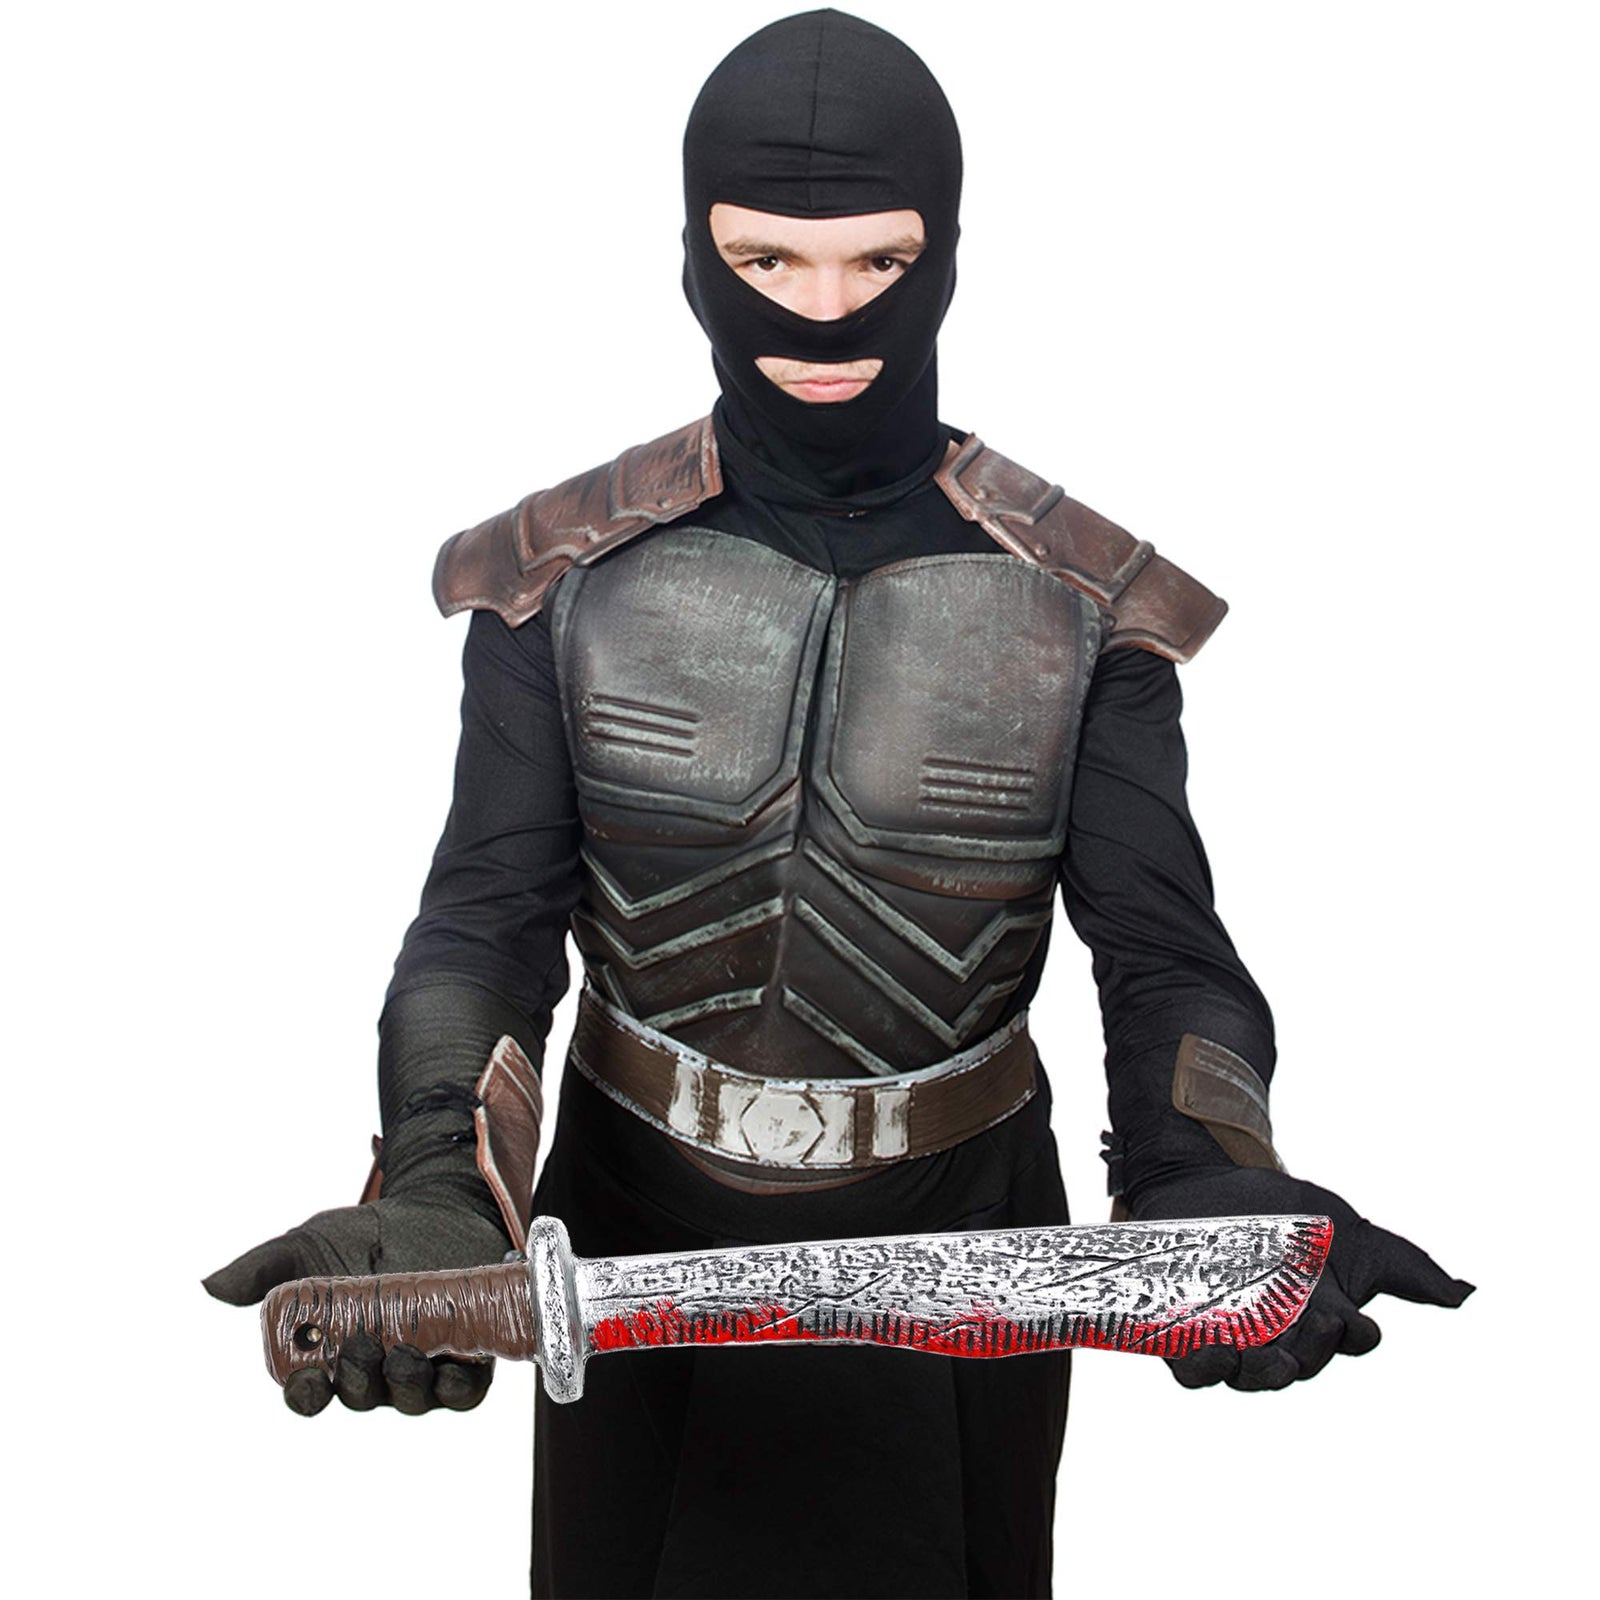 Skeleteen Bloody Machete Costume Prop - Fake Realistic Bleeding Knife Toy for Costumes and Cosplay